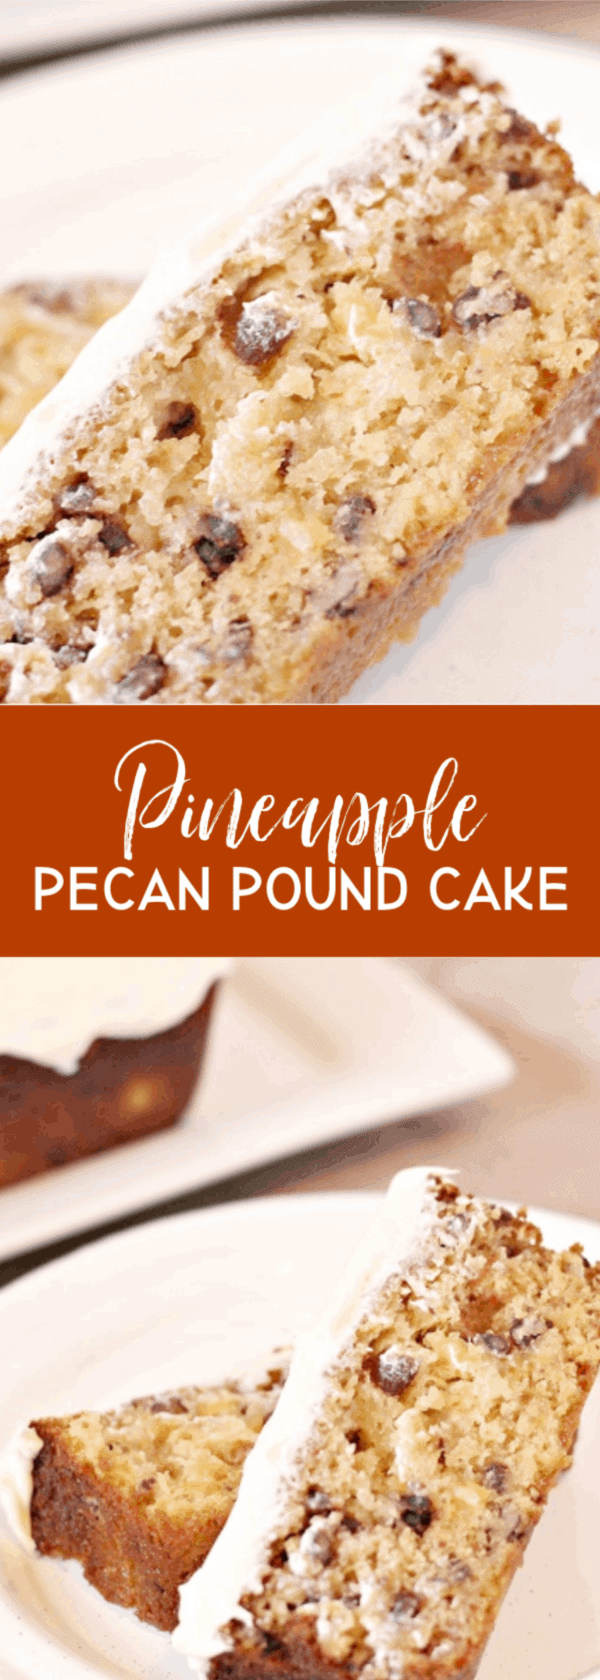 Flavorful and moist pineapple pecan pound cake with juicy, tart pineapple and crunchy pecans topped with a cream cheese frosting. via @Mooreorlesscook